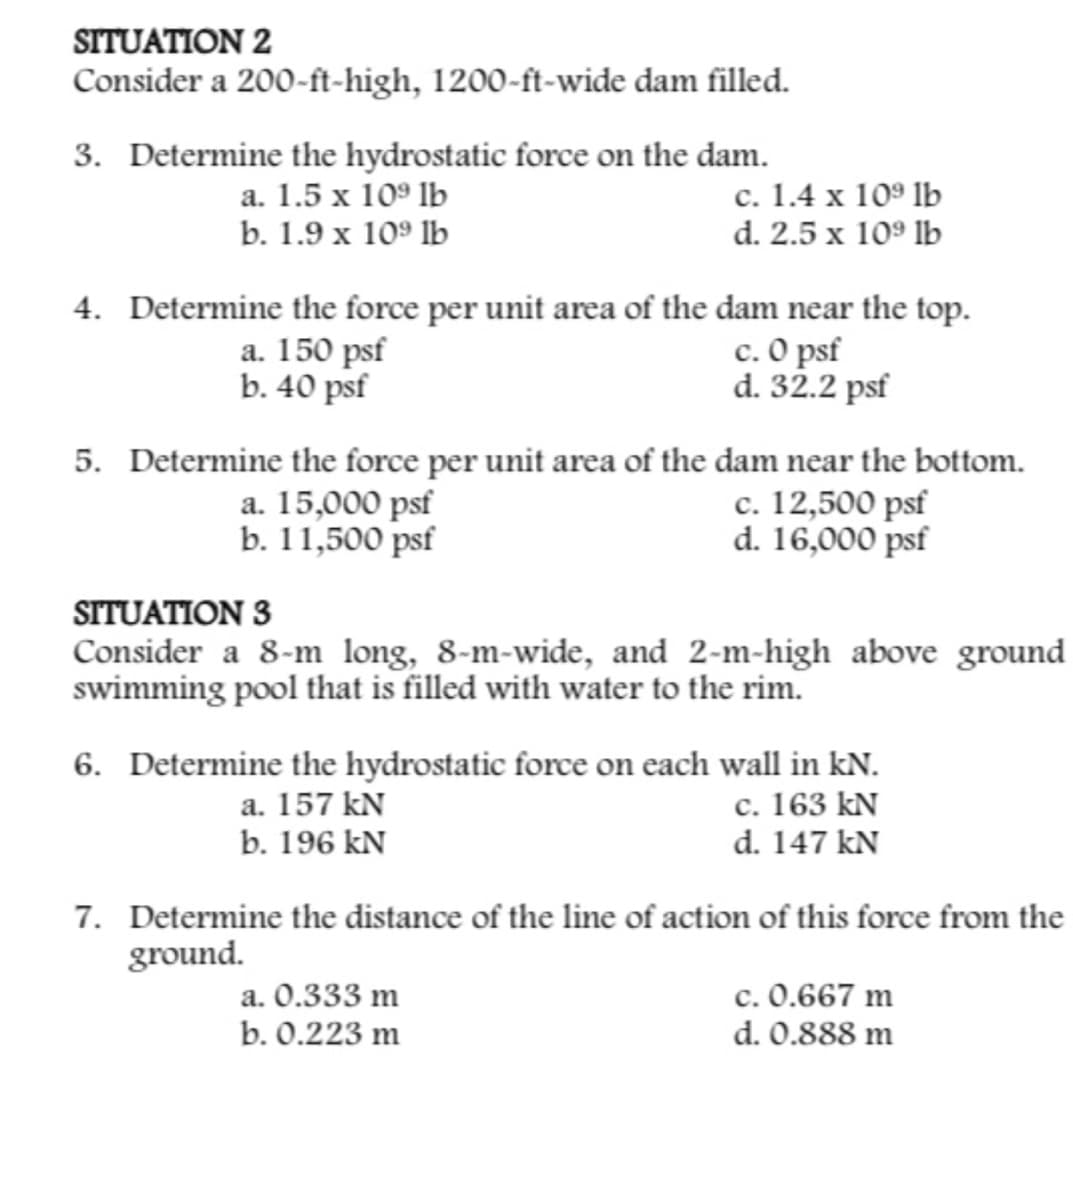 SITUATION 2
Consider a 200-ft-high, 1200-ft-wide dam filled.
3. Determine the hydrostatic force on the dam.
a. 1.5 x 109 lb
c. 1.4 x 109 lb
d. 2.5 x 10⁹ lb
b. 1.9 x 109 lb
4. Determine the force per unit area of the dam near the top.
a. 150 psf
b. 40 psf
c. 0 psf
d. 32.2 psf
5. Determine the force per unit area of the dam near the bottom.
a. 15,000 psf
b. 11,500 psf
c. 12,500 psf
d. 16,000 psf
SITUATION 3
Consider a 8-m long, 8-m-wide, and 2-m-high above ground
swimming pool that is filled with water to the rim.
6. Determine the hydrostatic force on each wall in kN.
a. 157 kN
c. 163 kN
d. 147 kN
b. 196 kN
7. Determine the distance of the line of action of this force from the
ground.
a. 0.333 m
c. 0.667 m
b. 0.223 m
d. 0.888 m